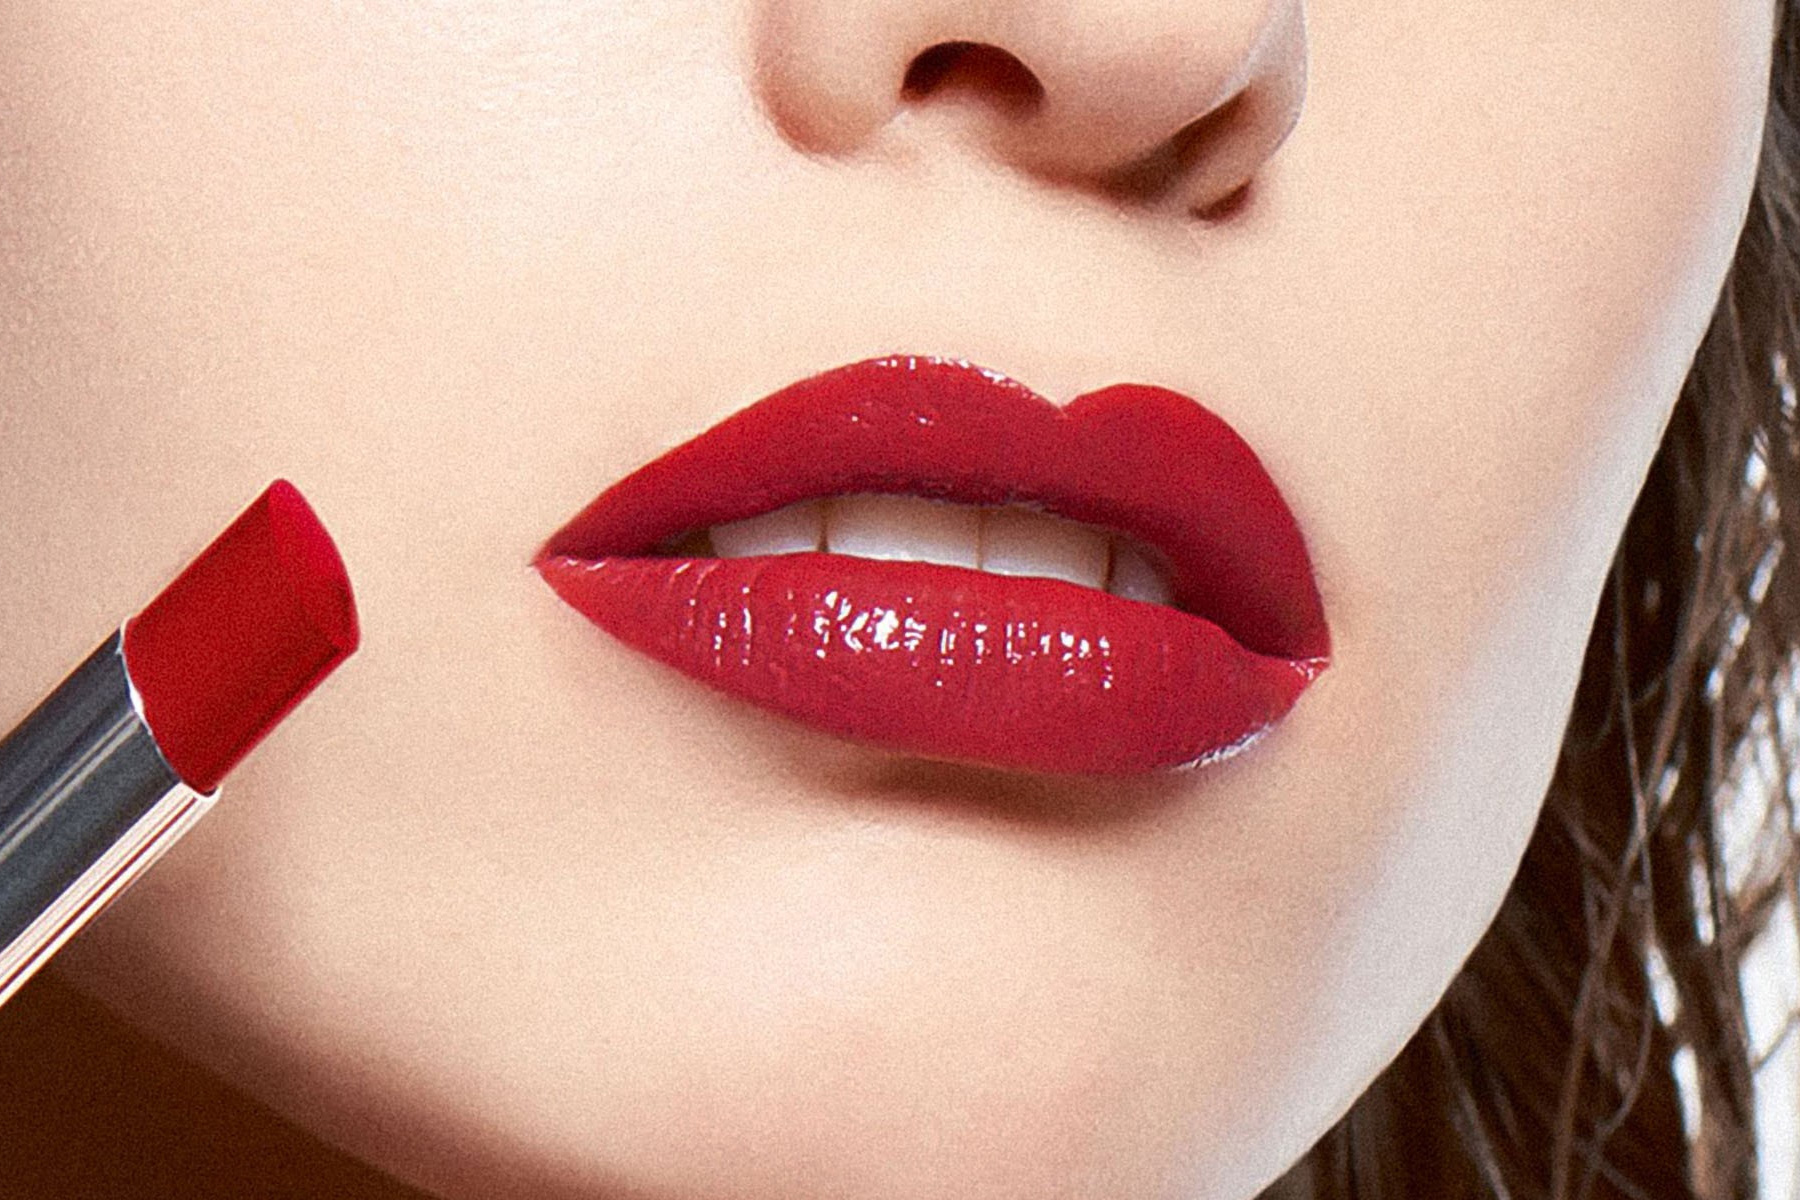 dior-addict-lacquer-stick-swatch-hollywood-red